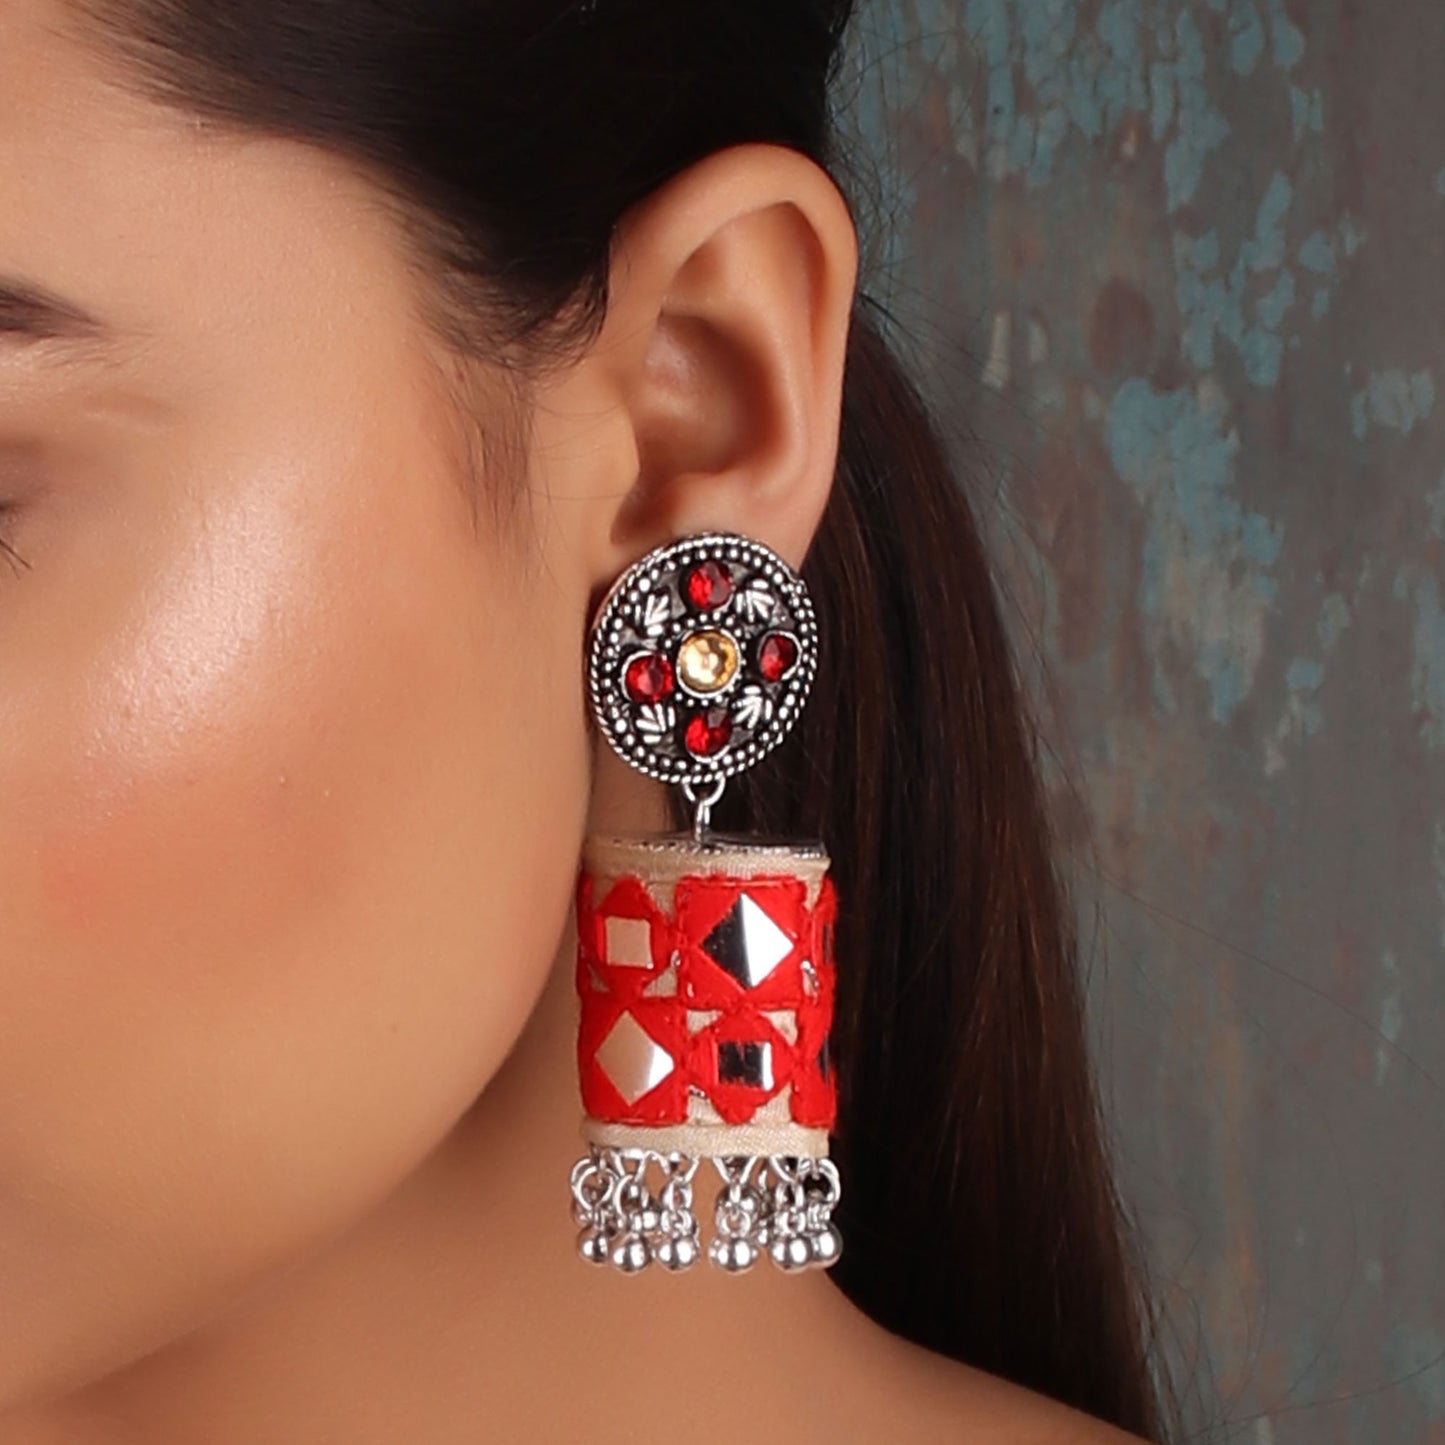 Earrings,The Artwork Earring in Red & Off-White - Cippele Multi Store